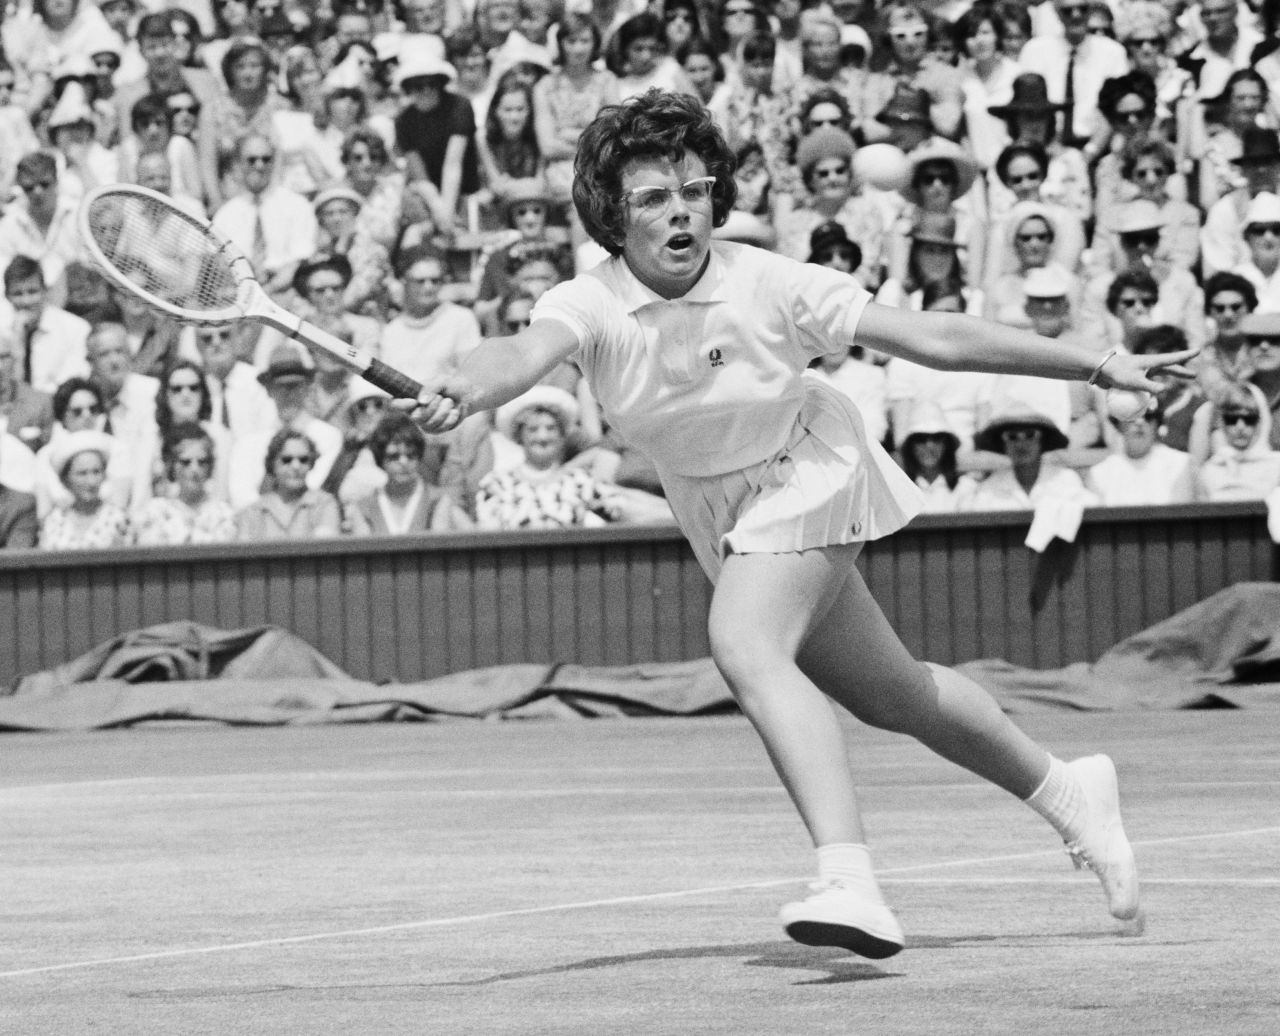 King made her tennis debut back in 1959. Here, competing under her maiden name Moffitt, she plays a forehand volley during her Wimbledon semifinal in 1964. 